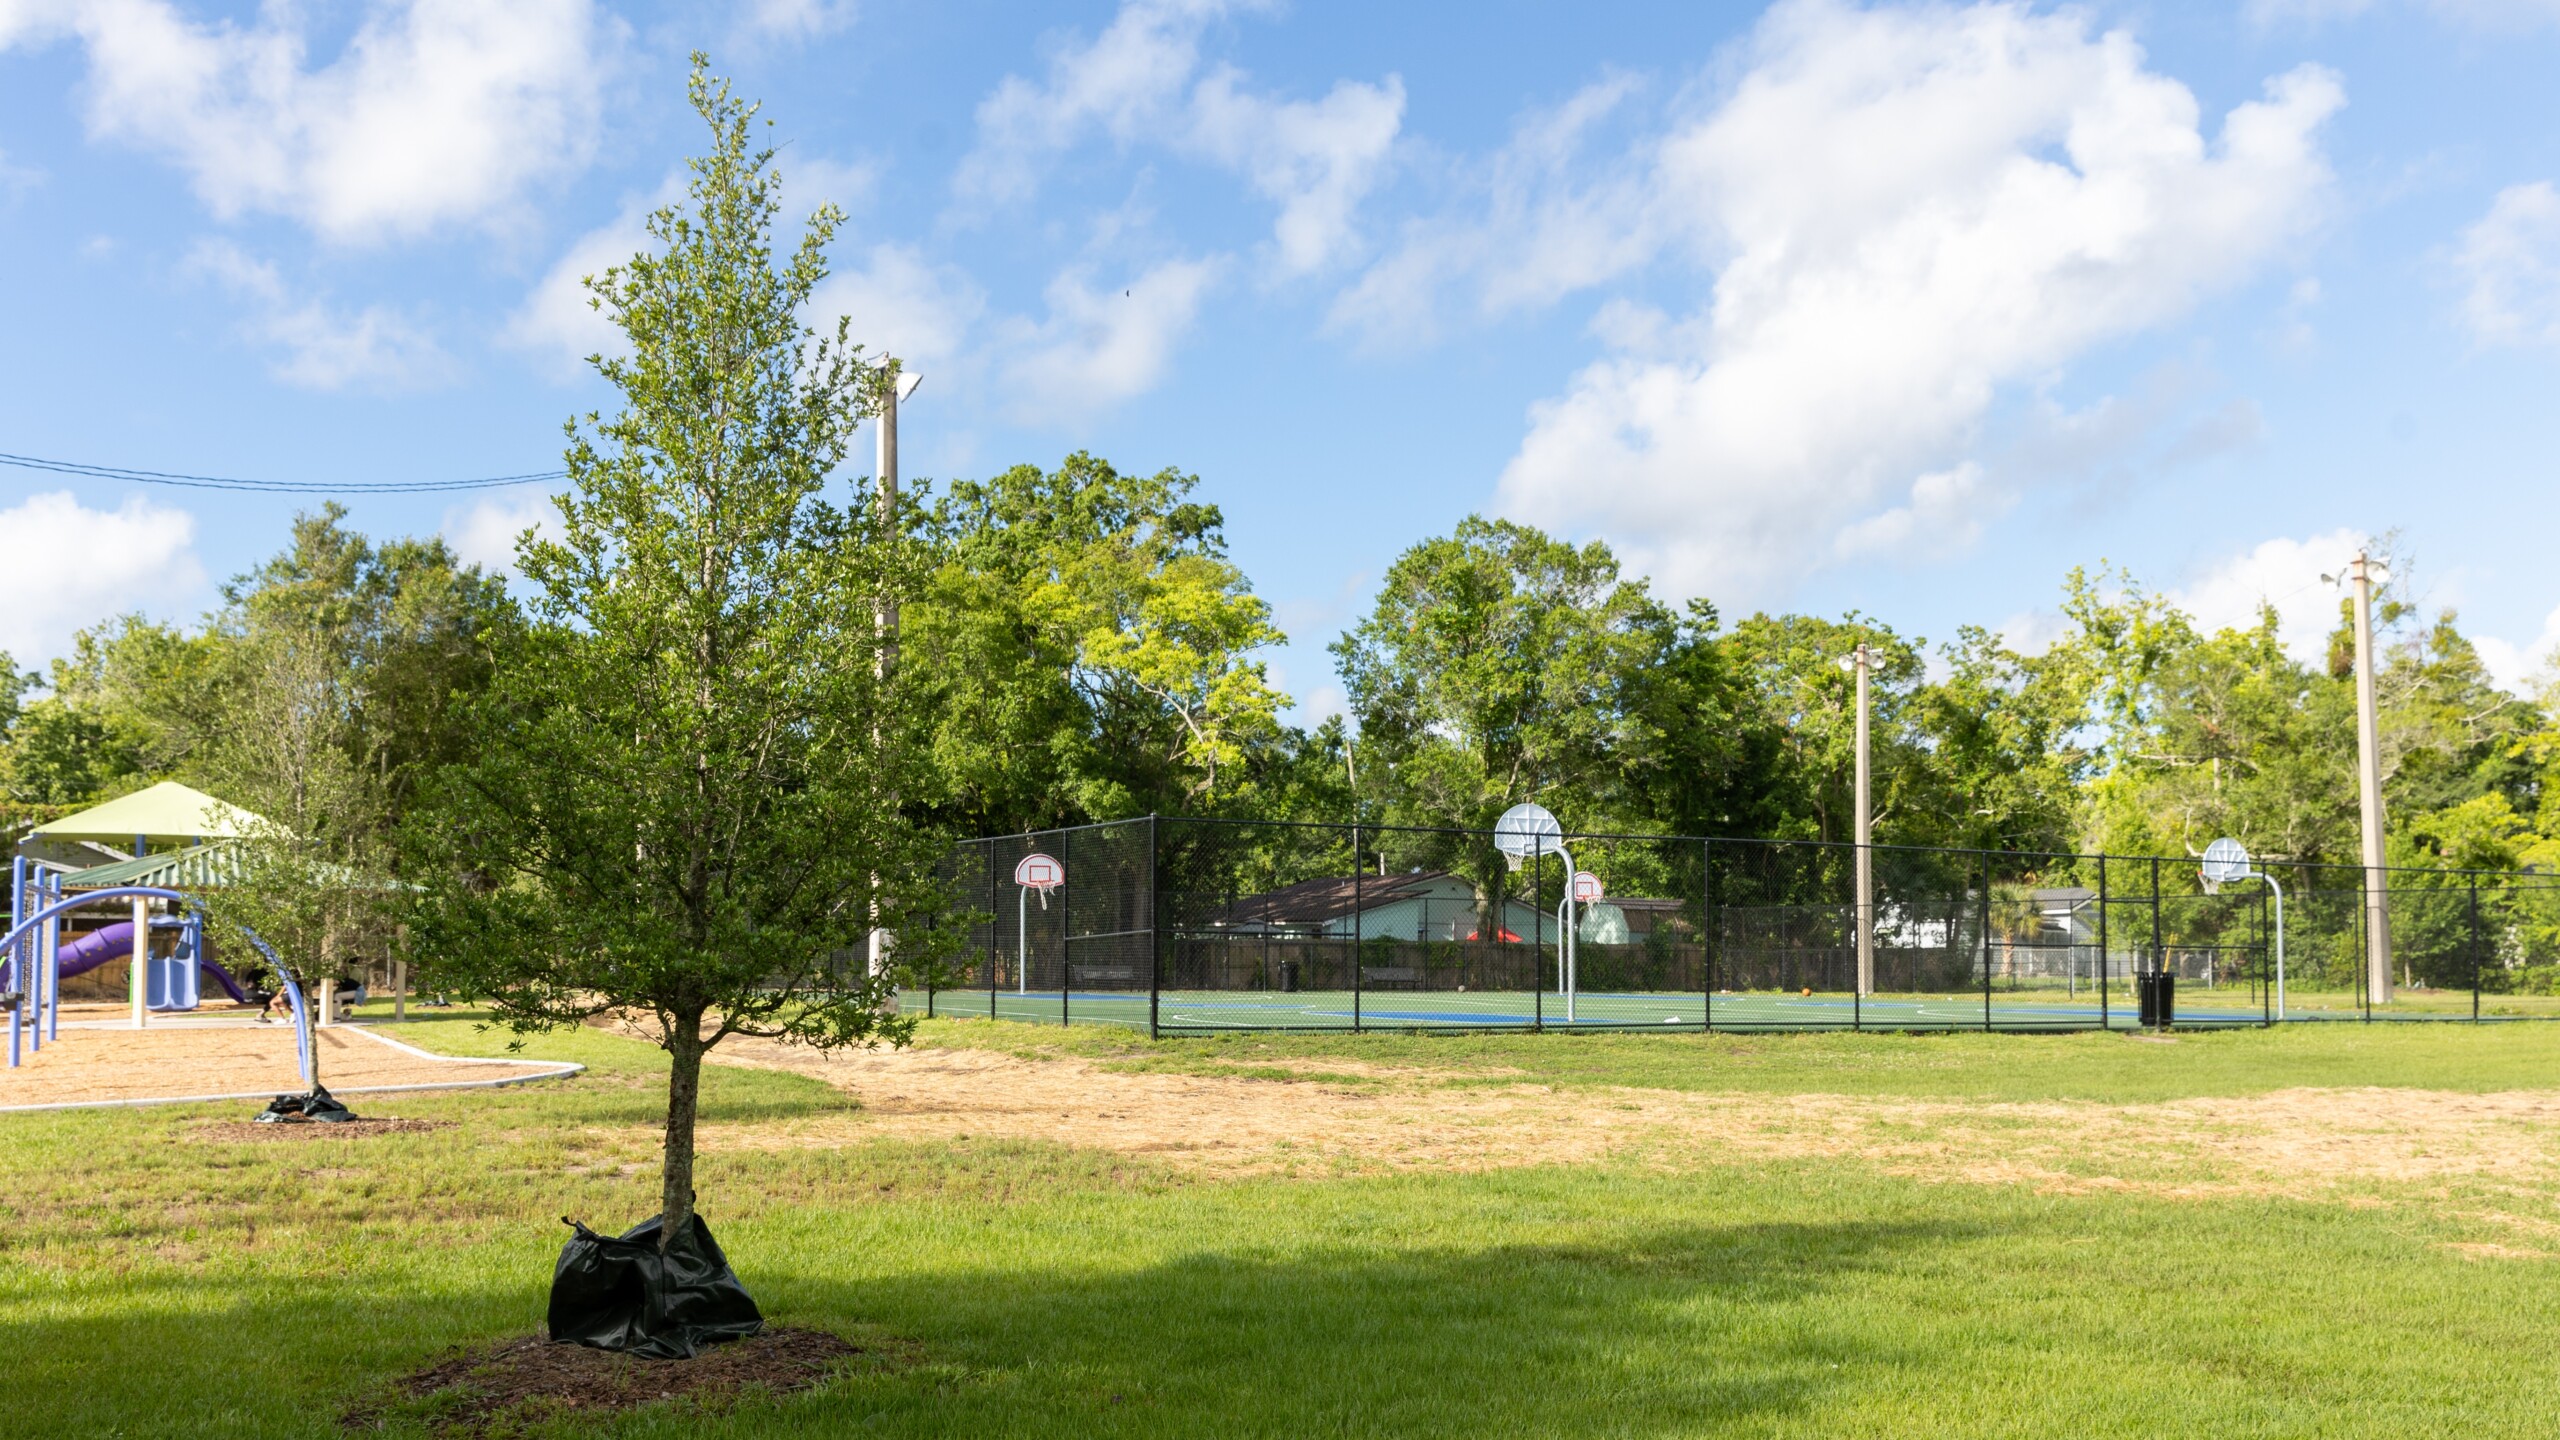 Grunthal Park in the Grand Park neighborhood was renovated in 2023 to convert tennis courts into basketball courts with a playground space. | Will Brown, Jacksonville Today